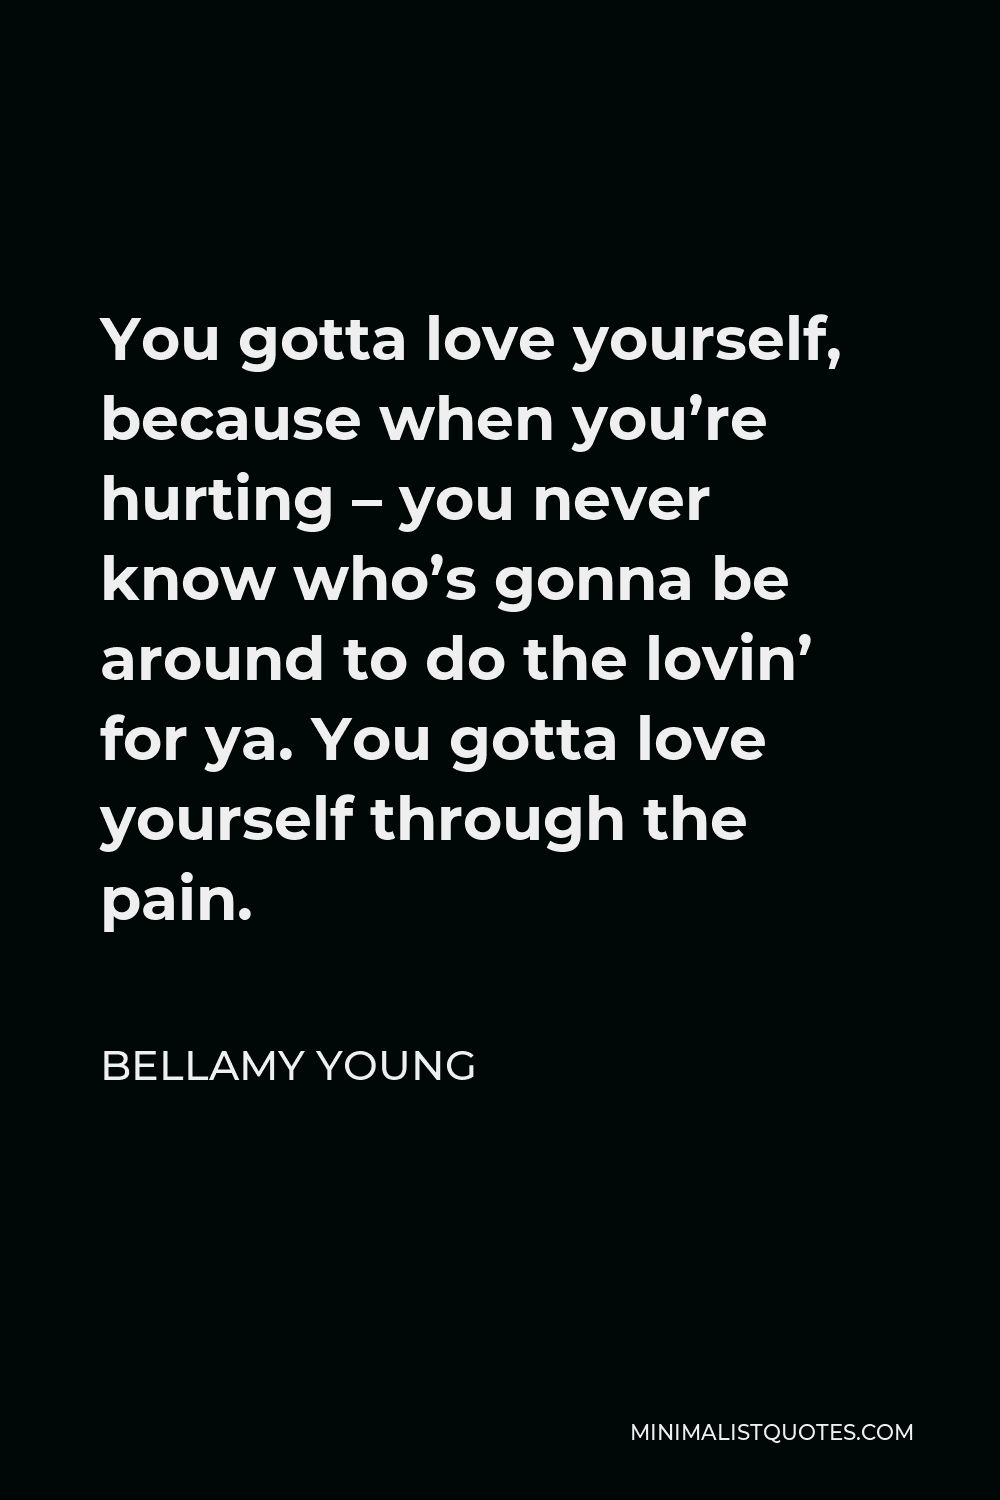 Bellamy Young Quote - You gotta love yourself, because when you’re hurting – you never know who’s gonna be around to do the lovin’ for ya. You gotta love yourself through the pain.